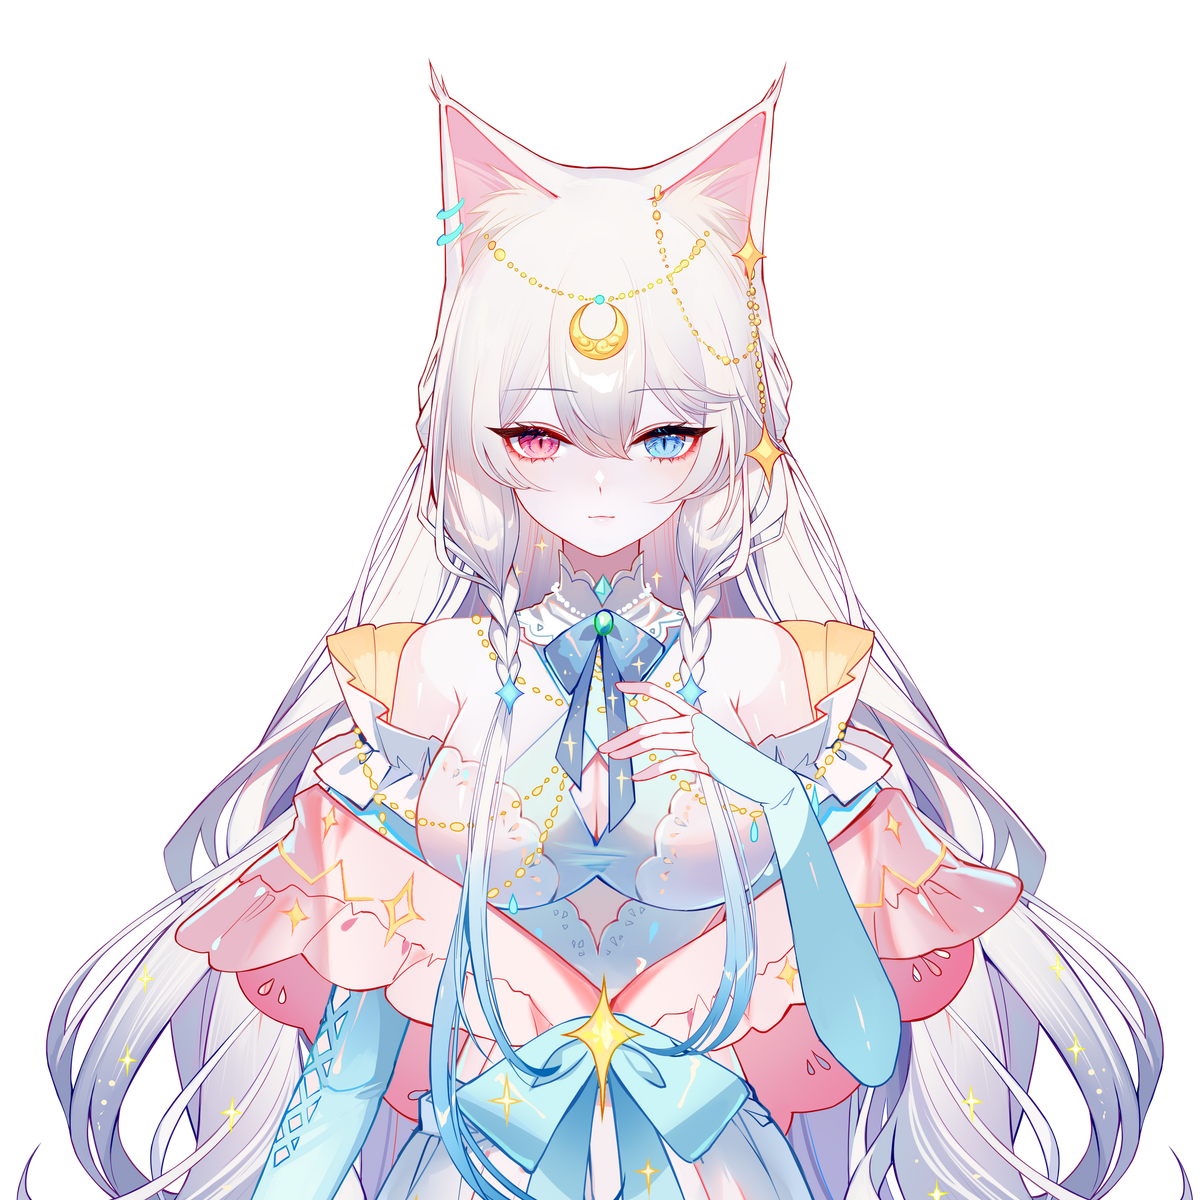 MOONBTCH🌙🔮 on X: FREE VTUBER MODEL ✨ TBH creature / Yippee Creature  Makes an XD face when eyes are closed 😆 Comes with confetti toggle 🎉  Bouncy dance based on mouse movement~